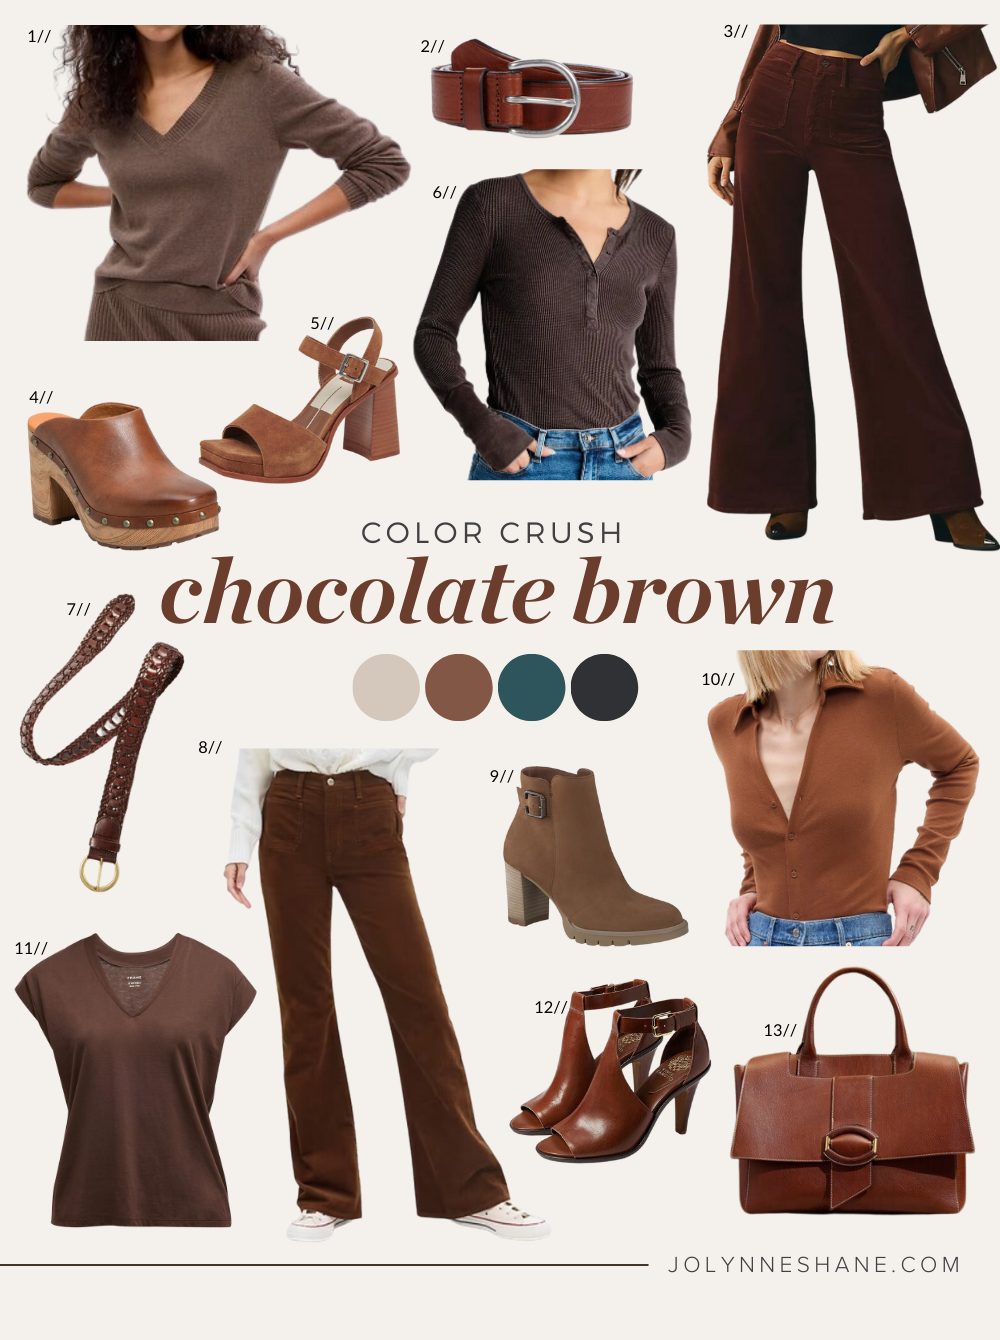 Fall Color Trend to Try: Chocolate Brown